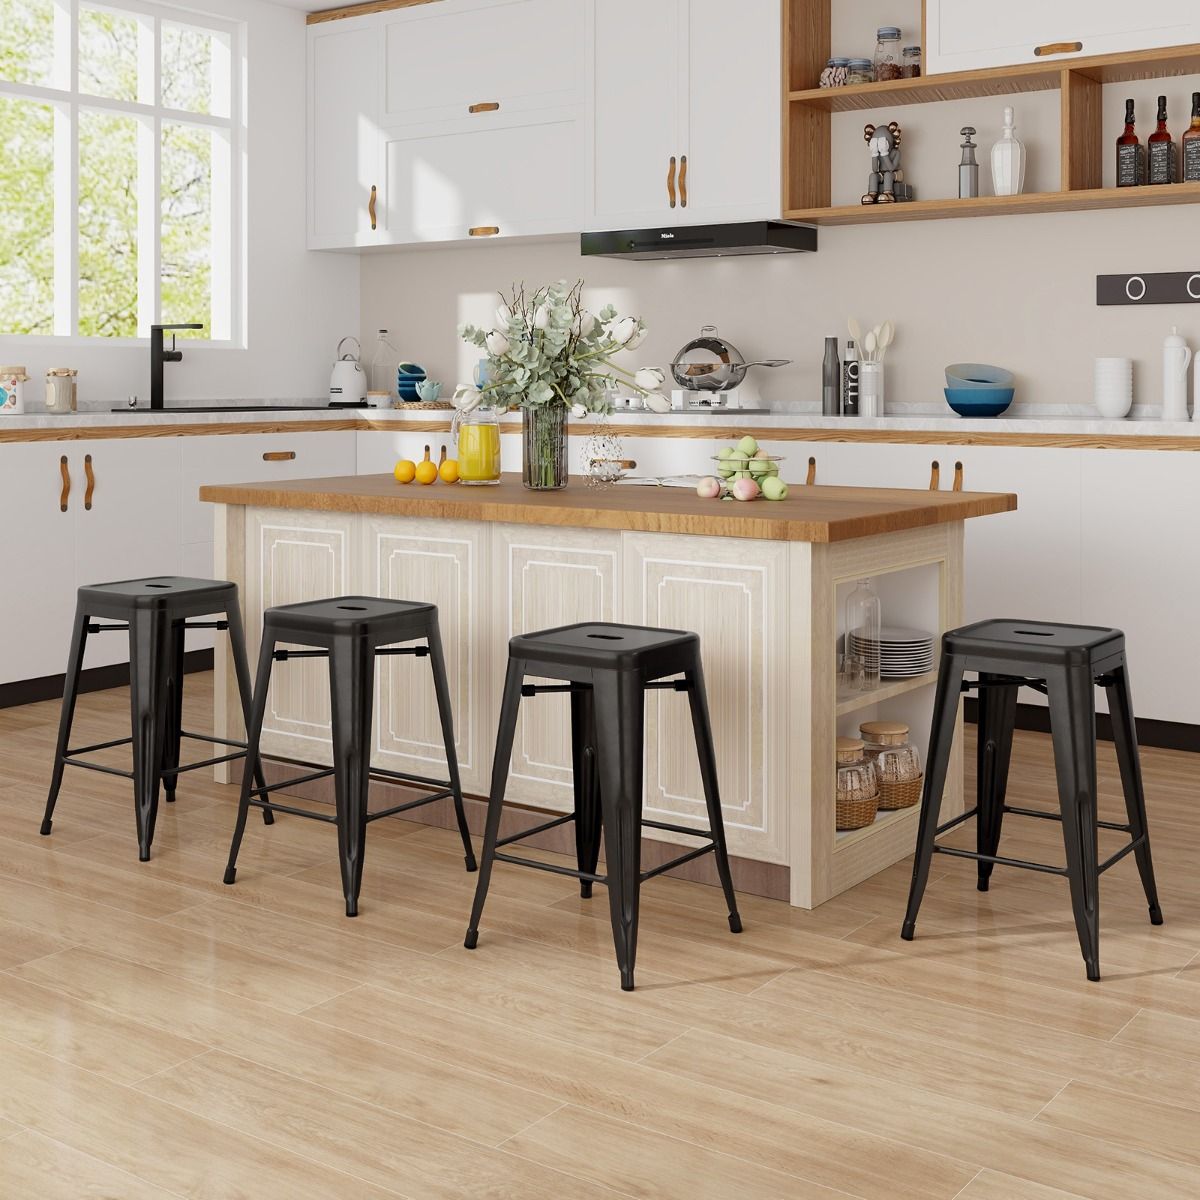 Set of 4 Metal Nesting Bar Stool with Handing Hole for Home Kitchen